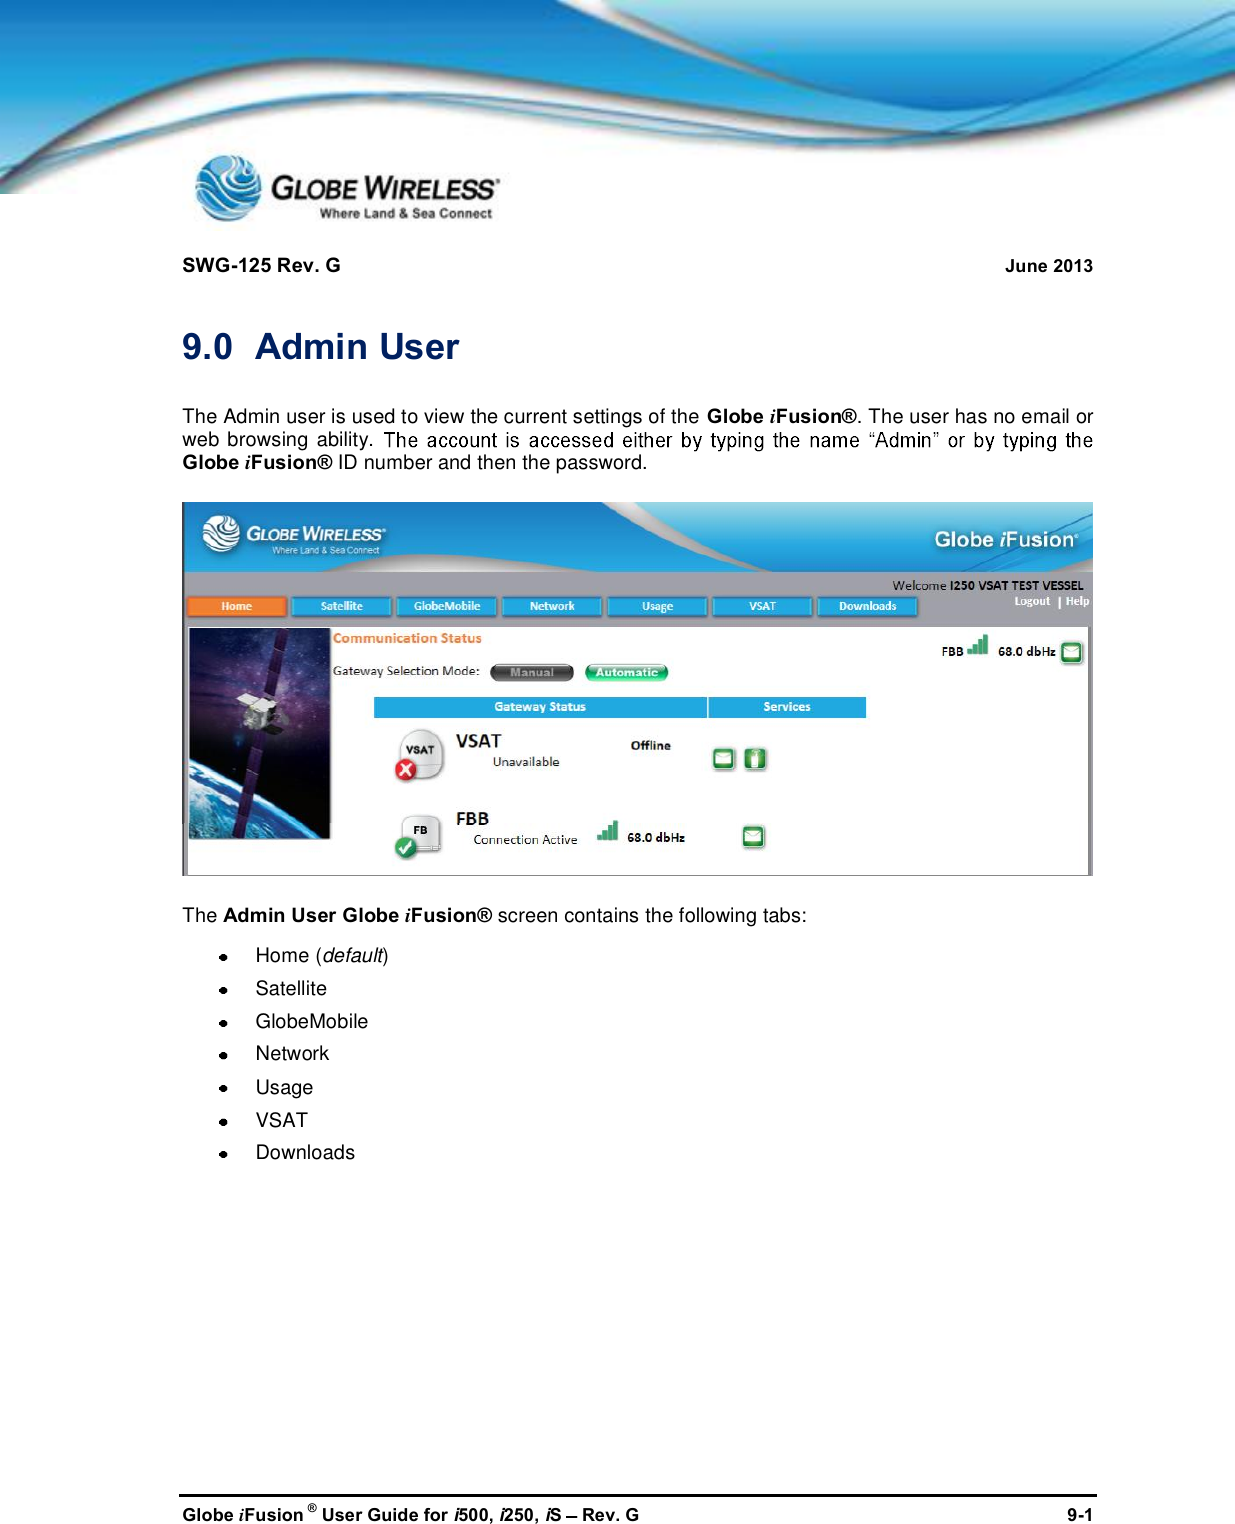 SWG-125 Rev. G June 2013Globe iFusion ®User Guide for i500, i250, iSRev. G 9-19.0 Admin UserThe Admin user is used to view the current settings of the Globe iFusion®. The user has no email orweb browsing ability.Globe iFusion® ID number and then the password.The Admin User Globe iFusion® screen contains the following tabs:Home(default)SatelliteGlobeMobileNetworkUsageVSATDownloads